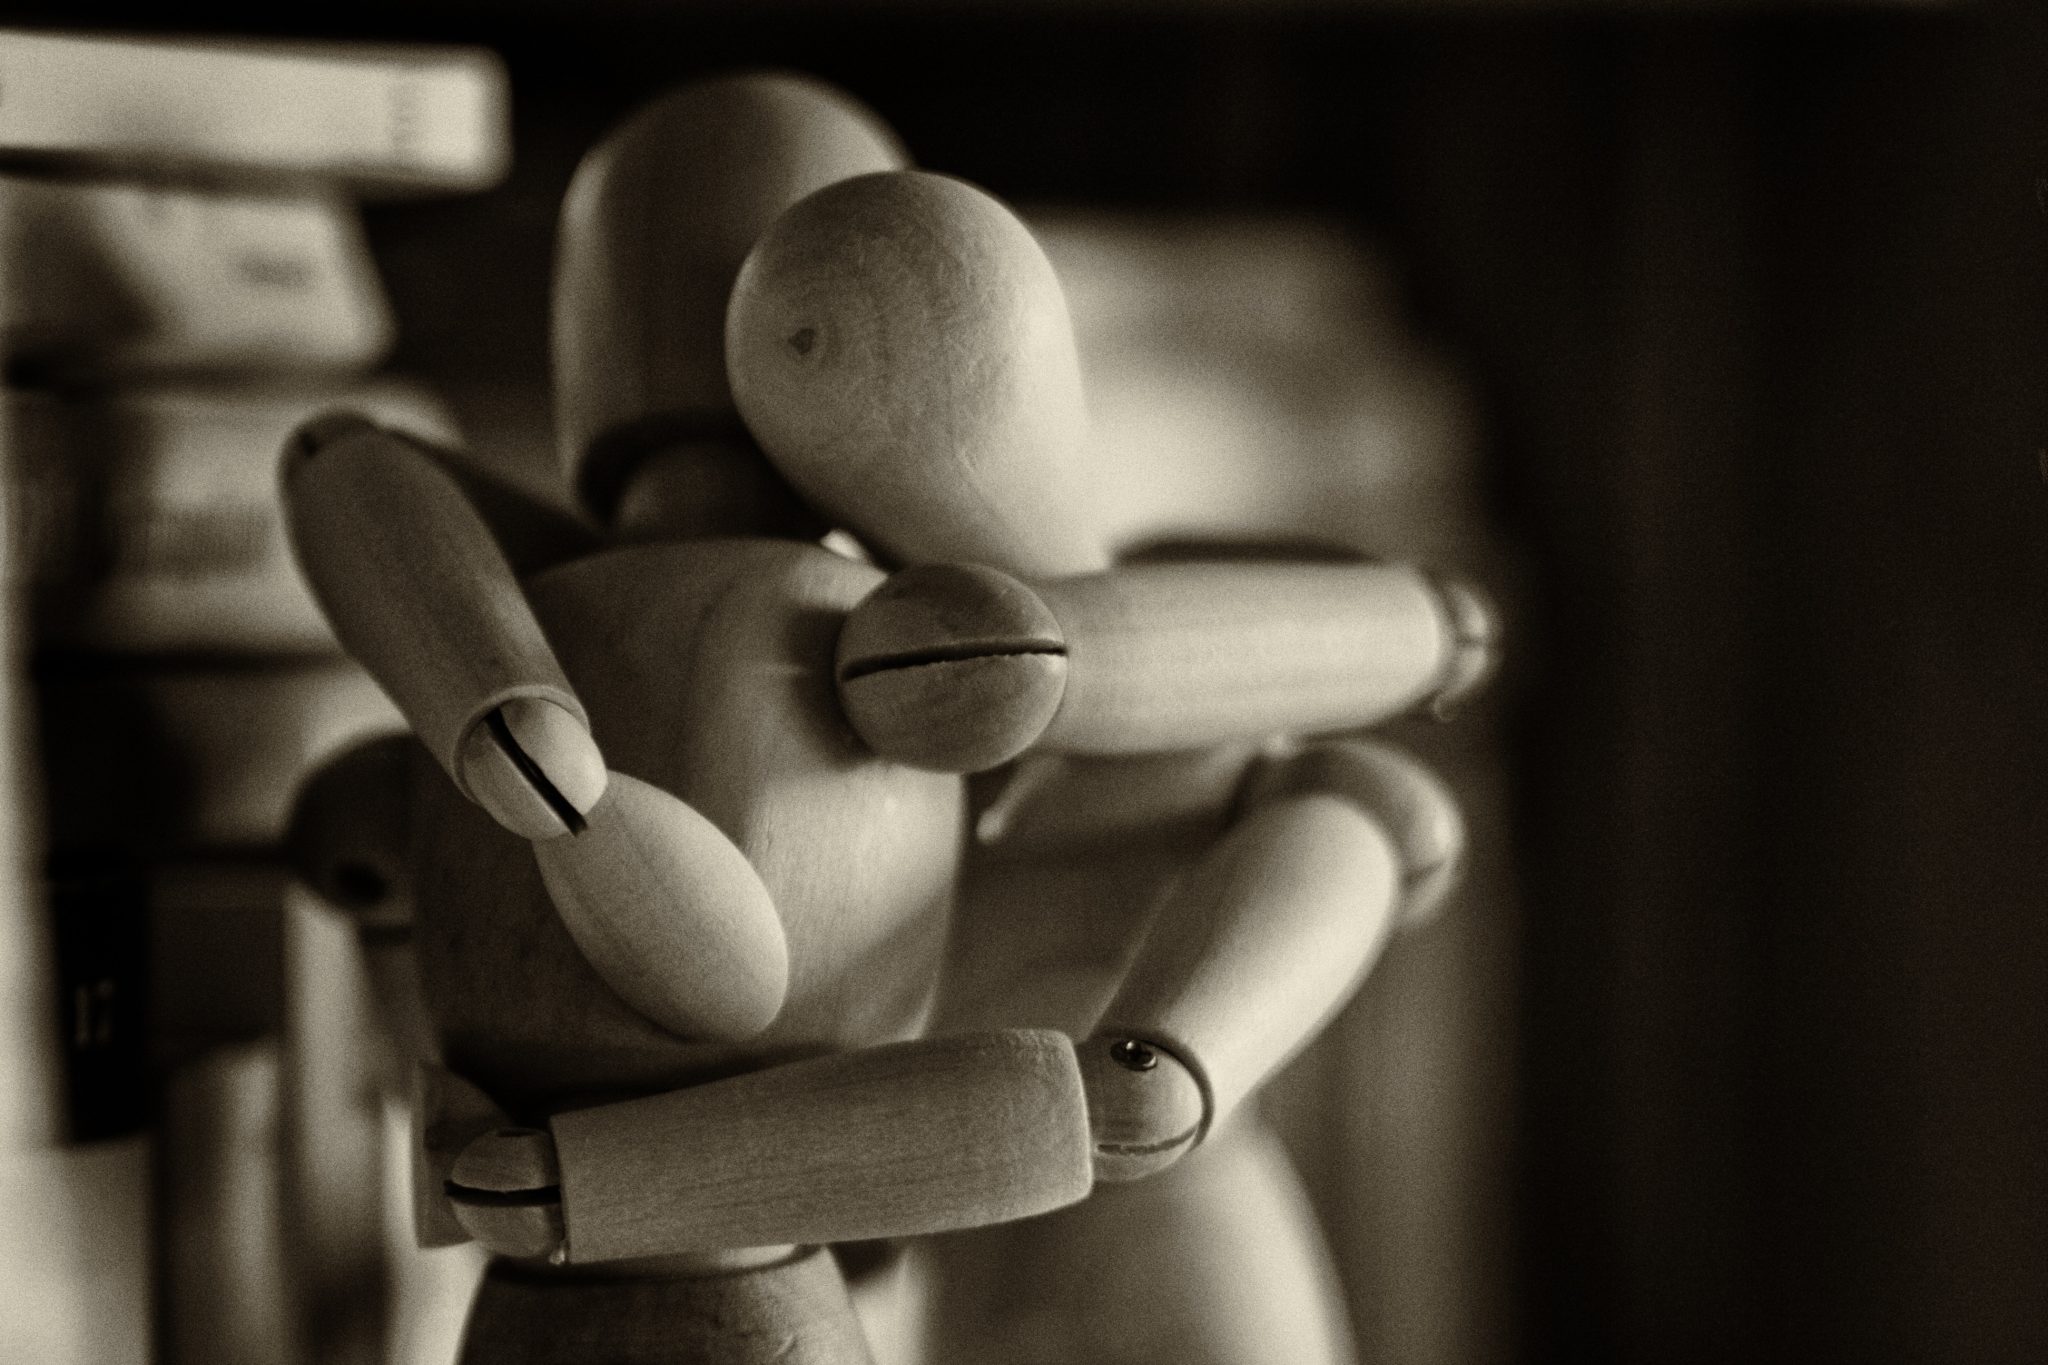 Mass shootings mental health - two wooden figures embracing in the shadows